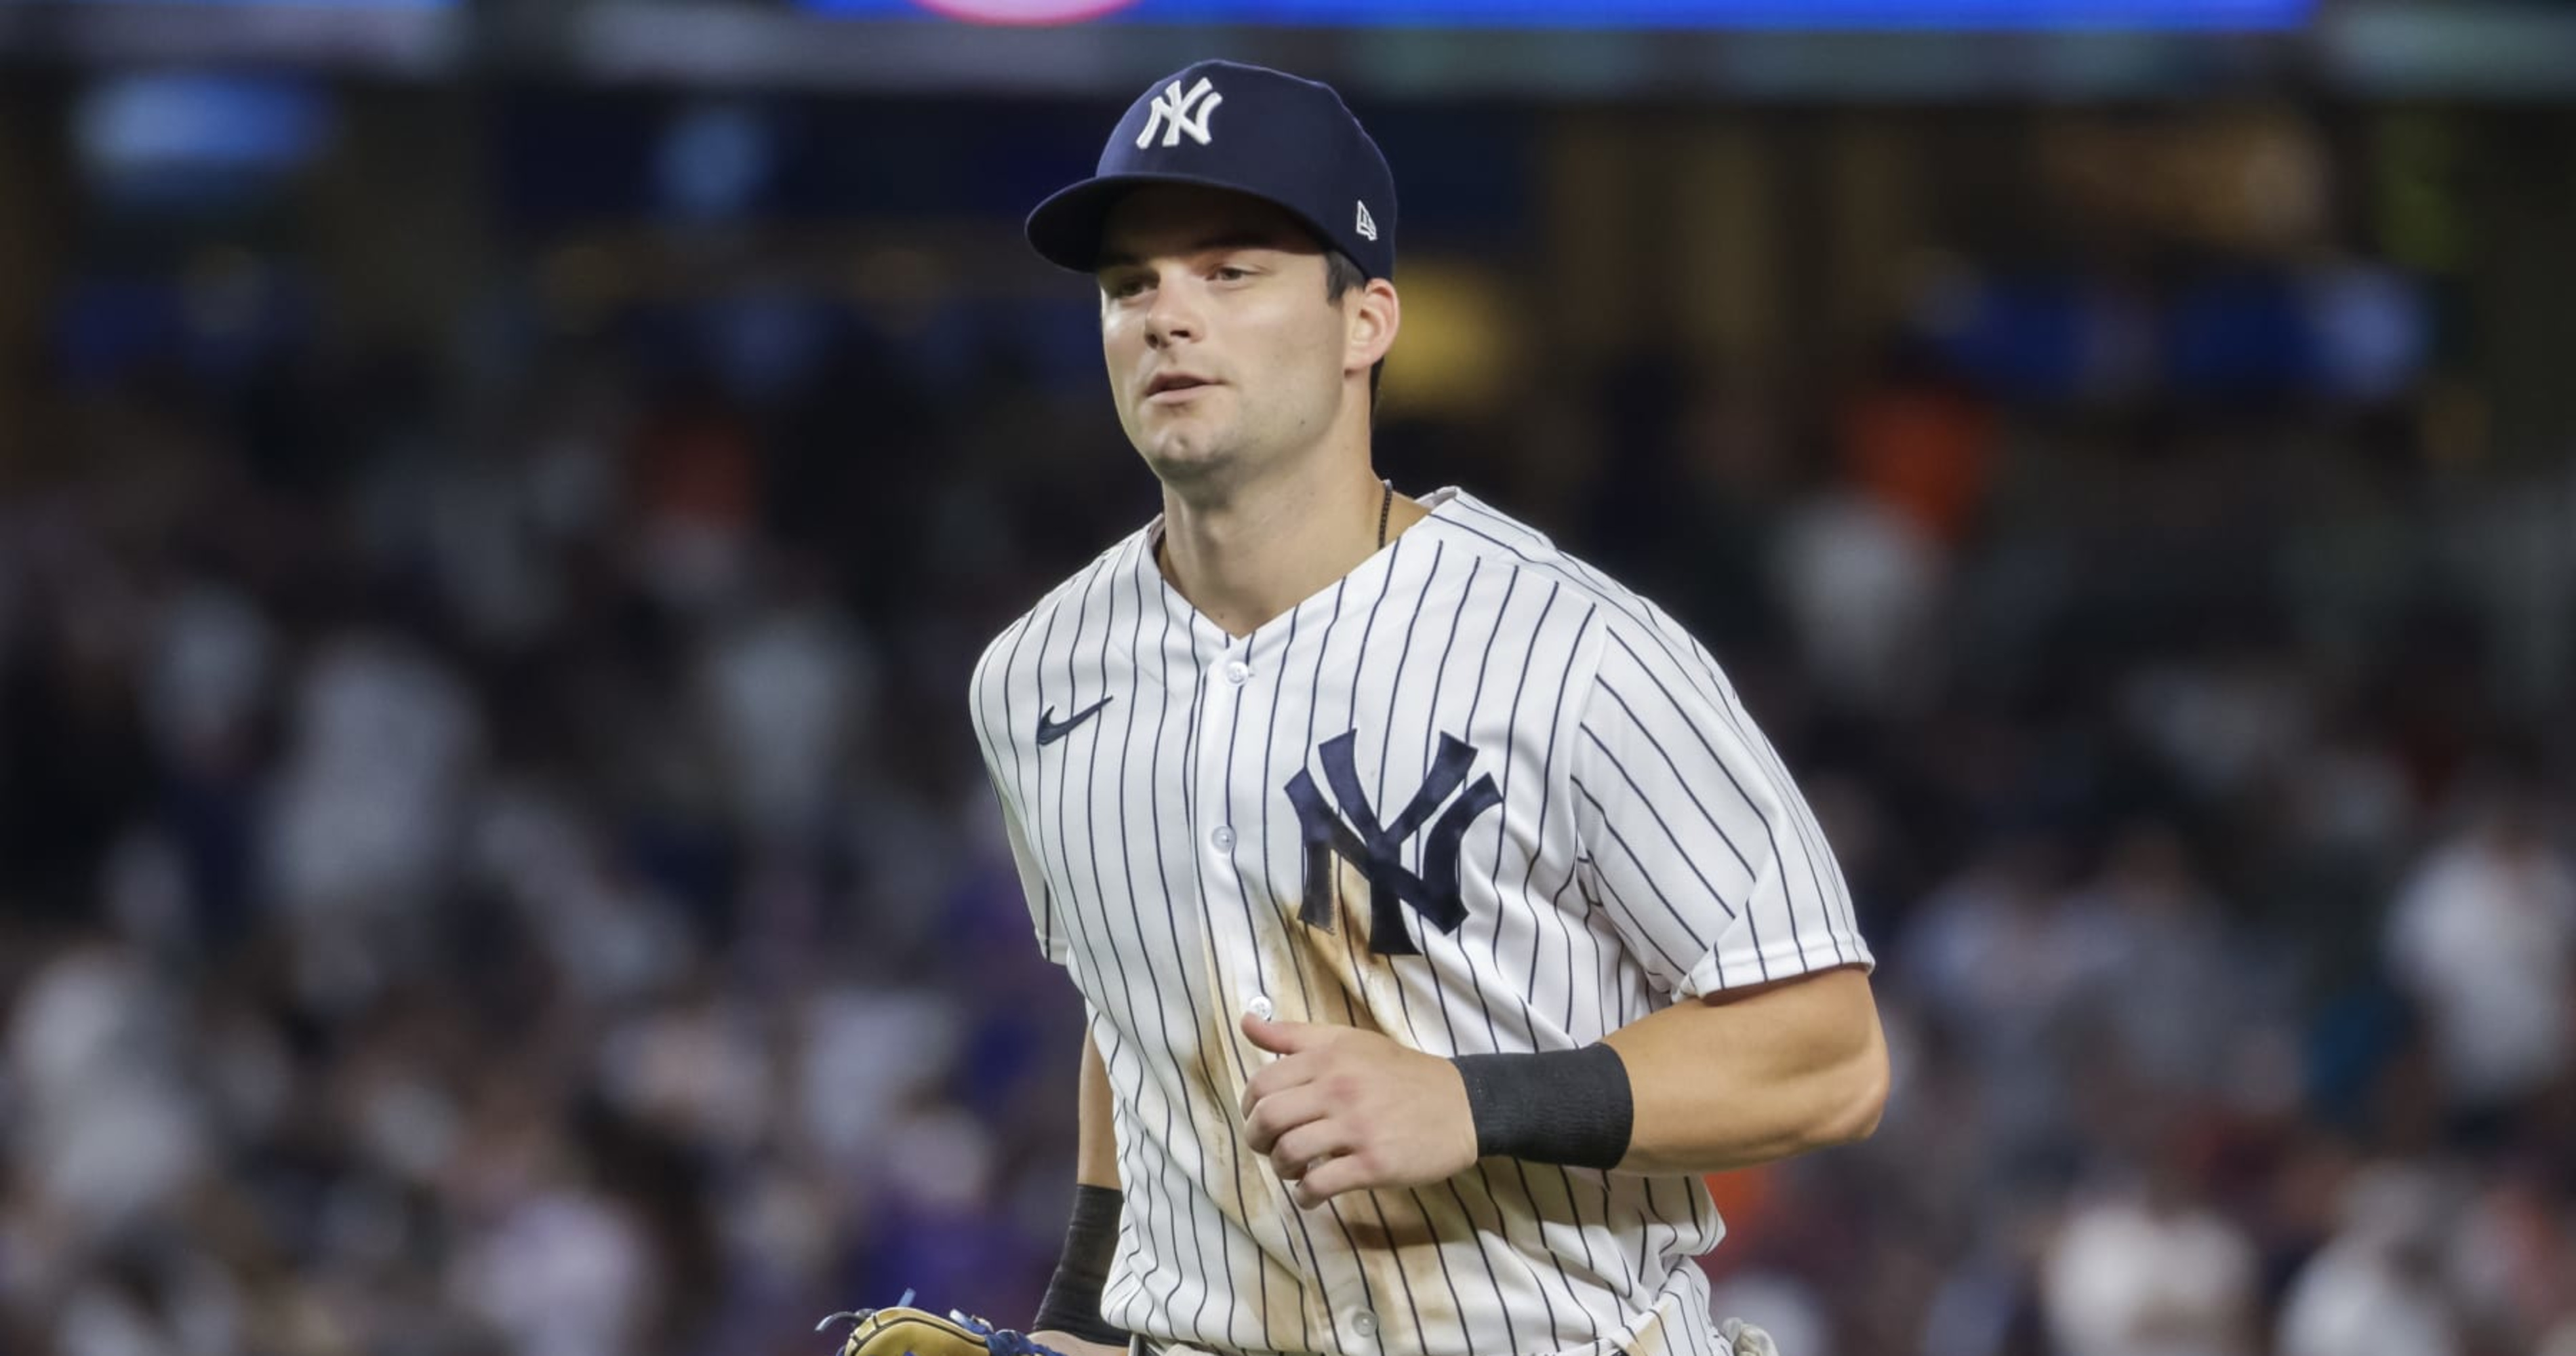 Yankees News: Andrew Benintendi Headed to IL After Suffering Wrist